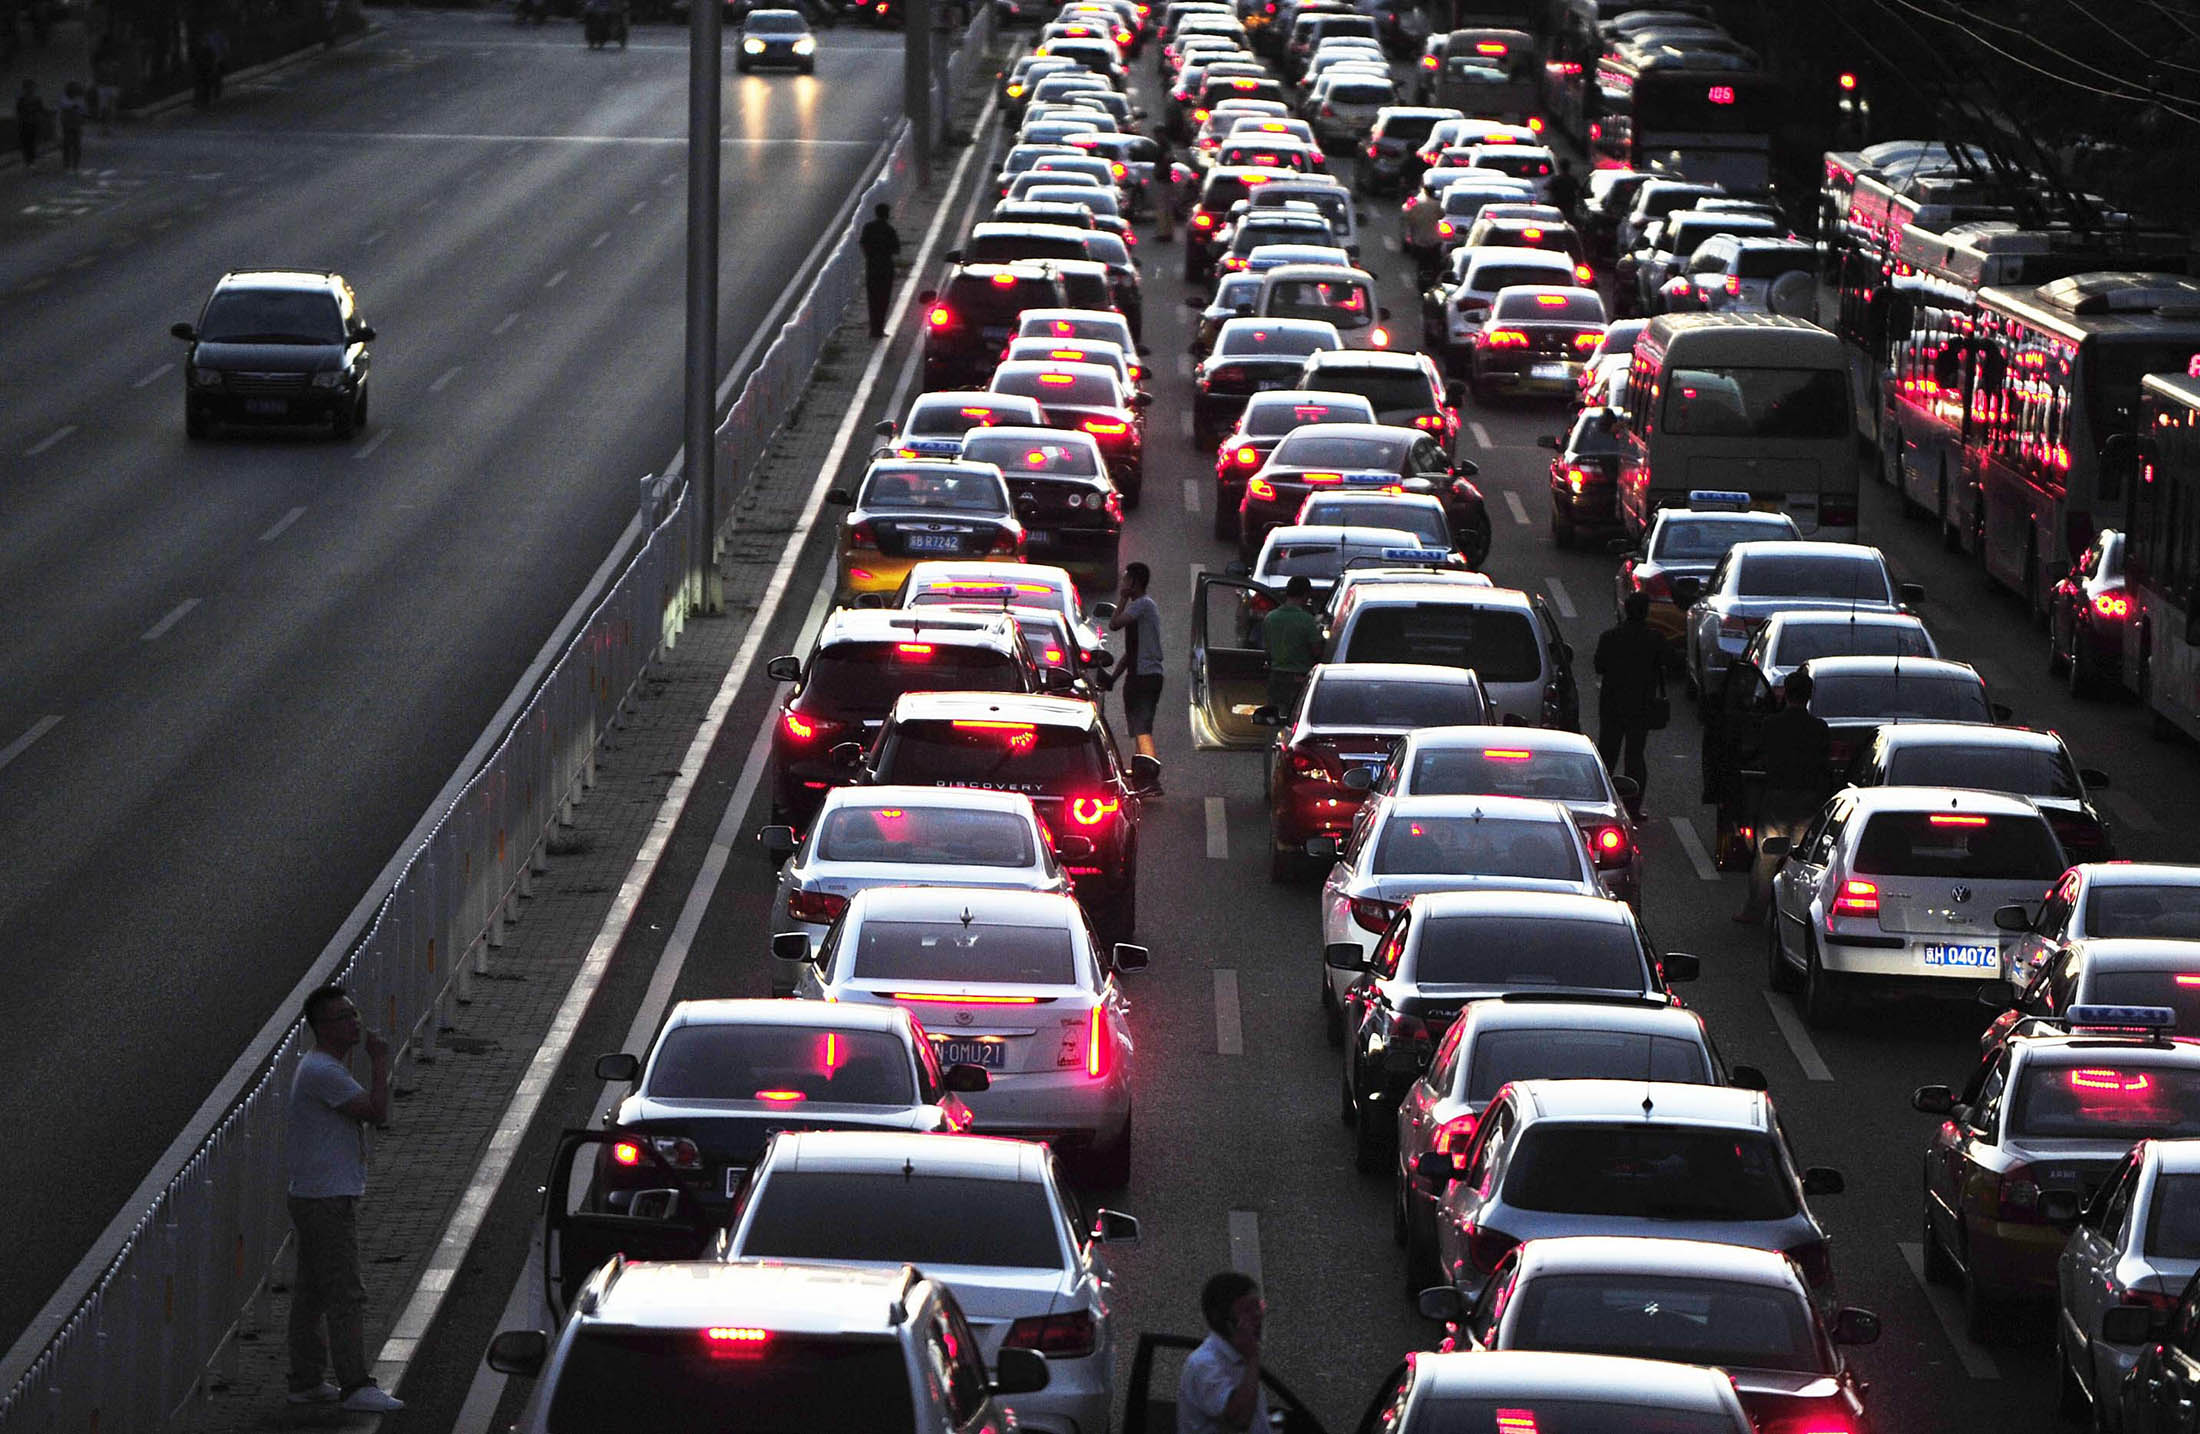 Vehicles stuck on the road at the evening rush hours in Beijing.
